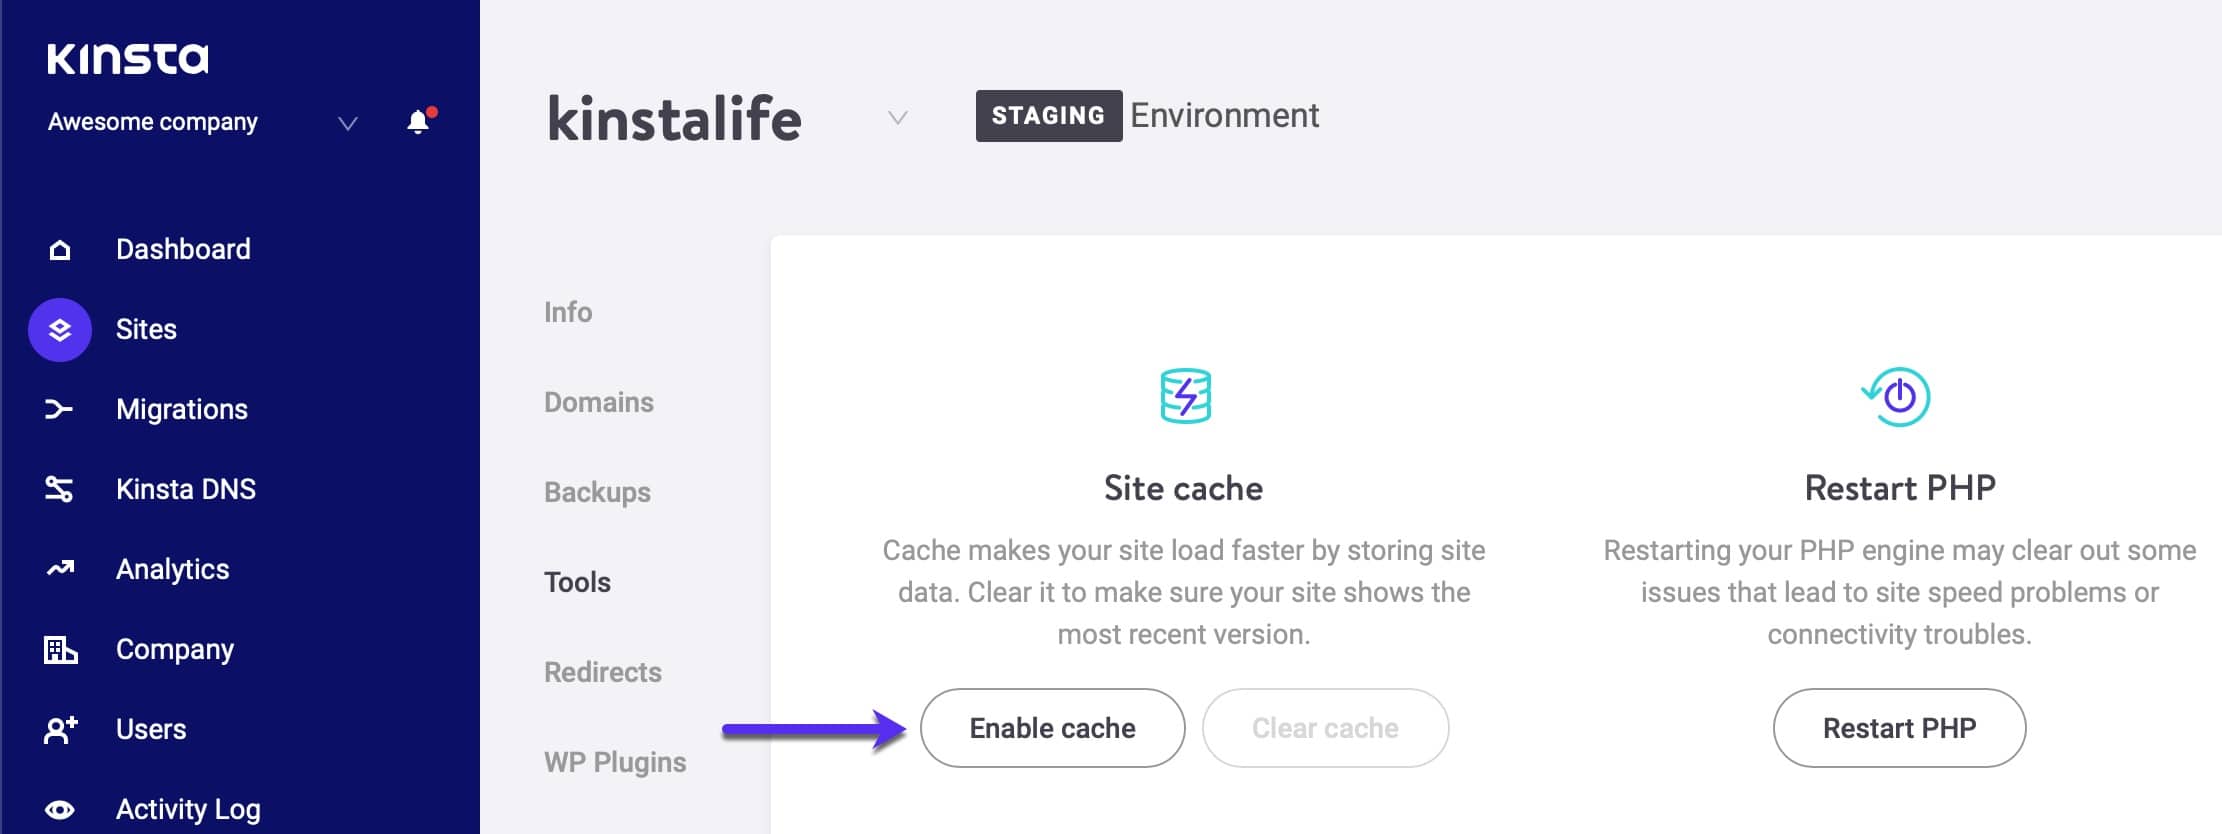 Enable cache on a staging environment.